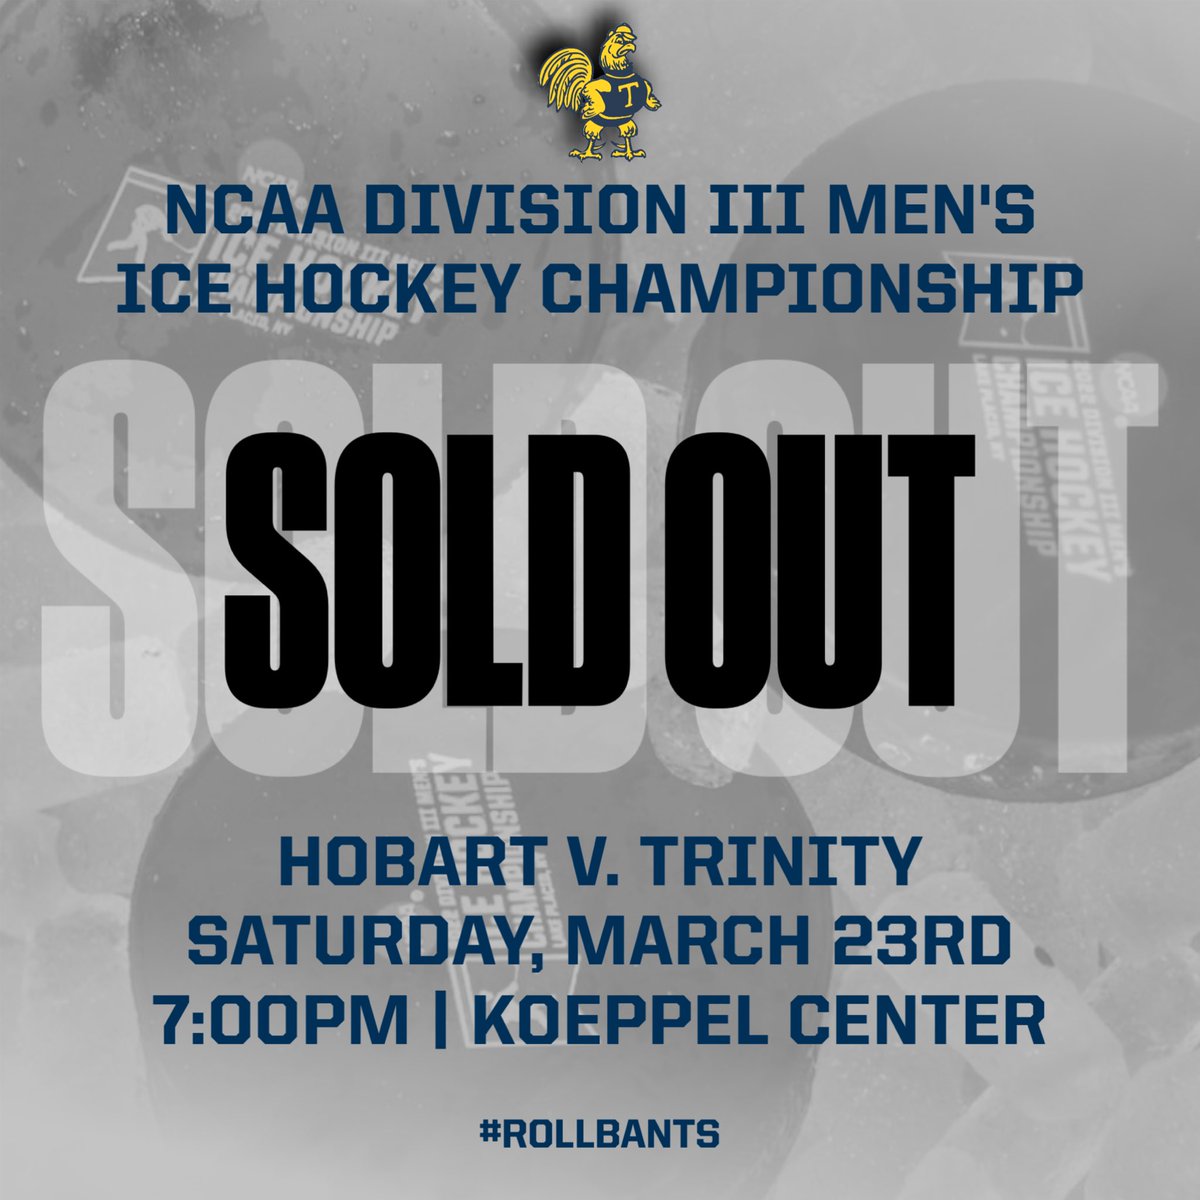 THE COOP IS PACKED AND SOLD OUT!!! Saturdays National Championship game is sold out and there will be no tickets sold at the door! We thank everyone who purchased a ticket and look forward to an exciting evening tomorrow night in Koeppel Center #RollBants🐓